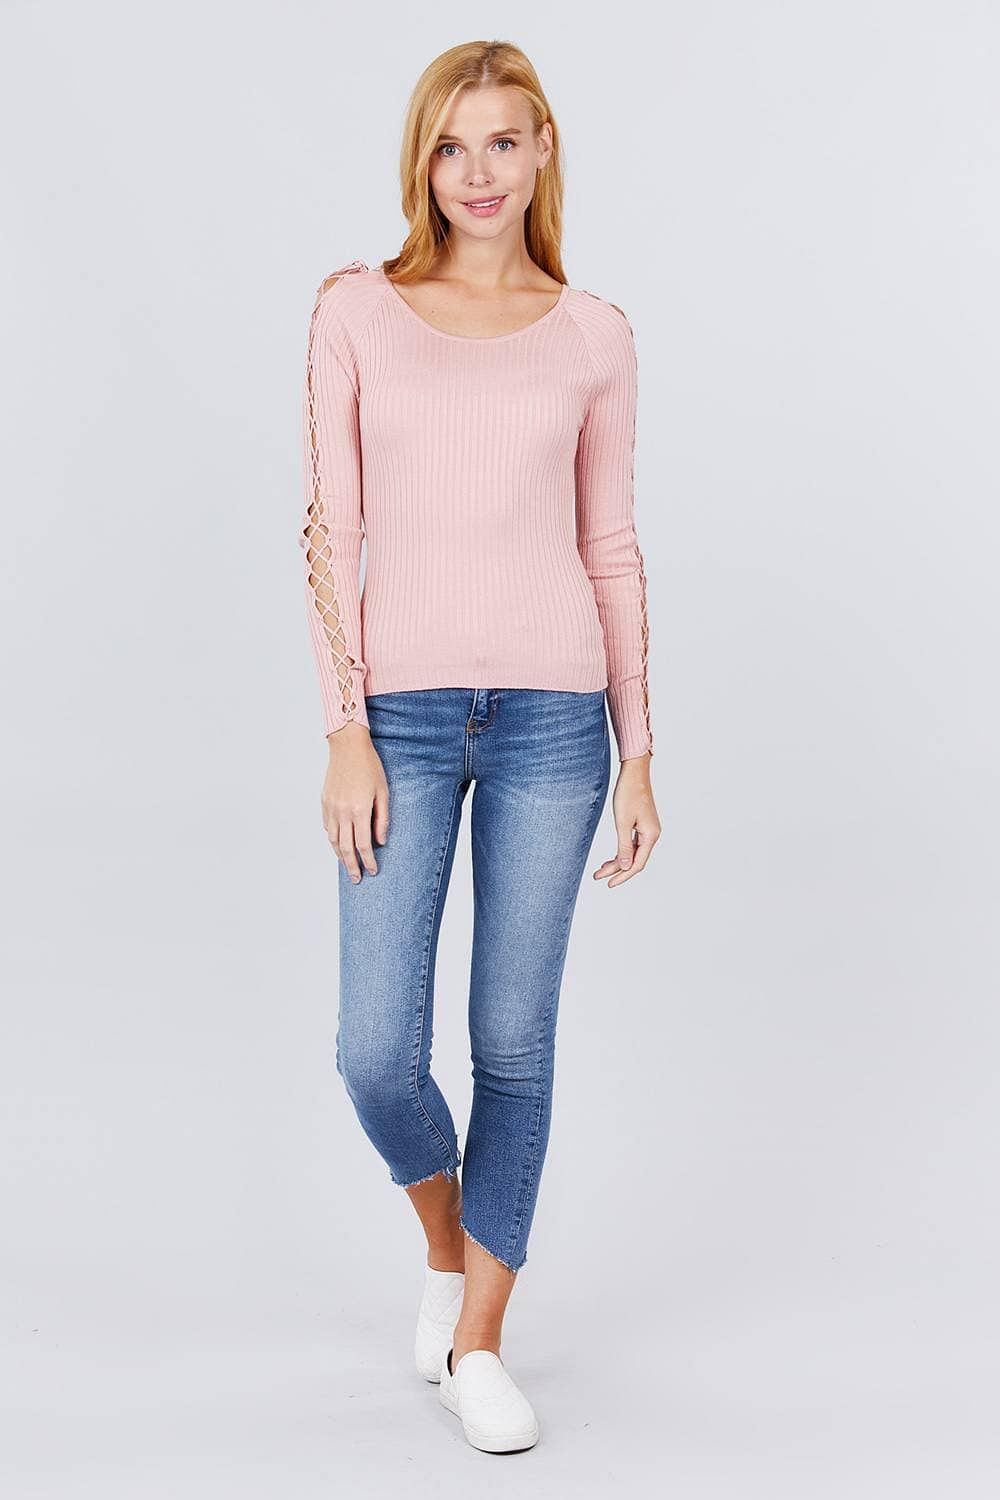 Pink Long Sleeve Scoop Neck Top - Shopping Therapy Top